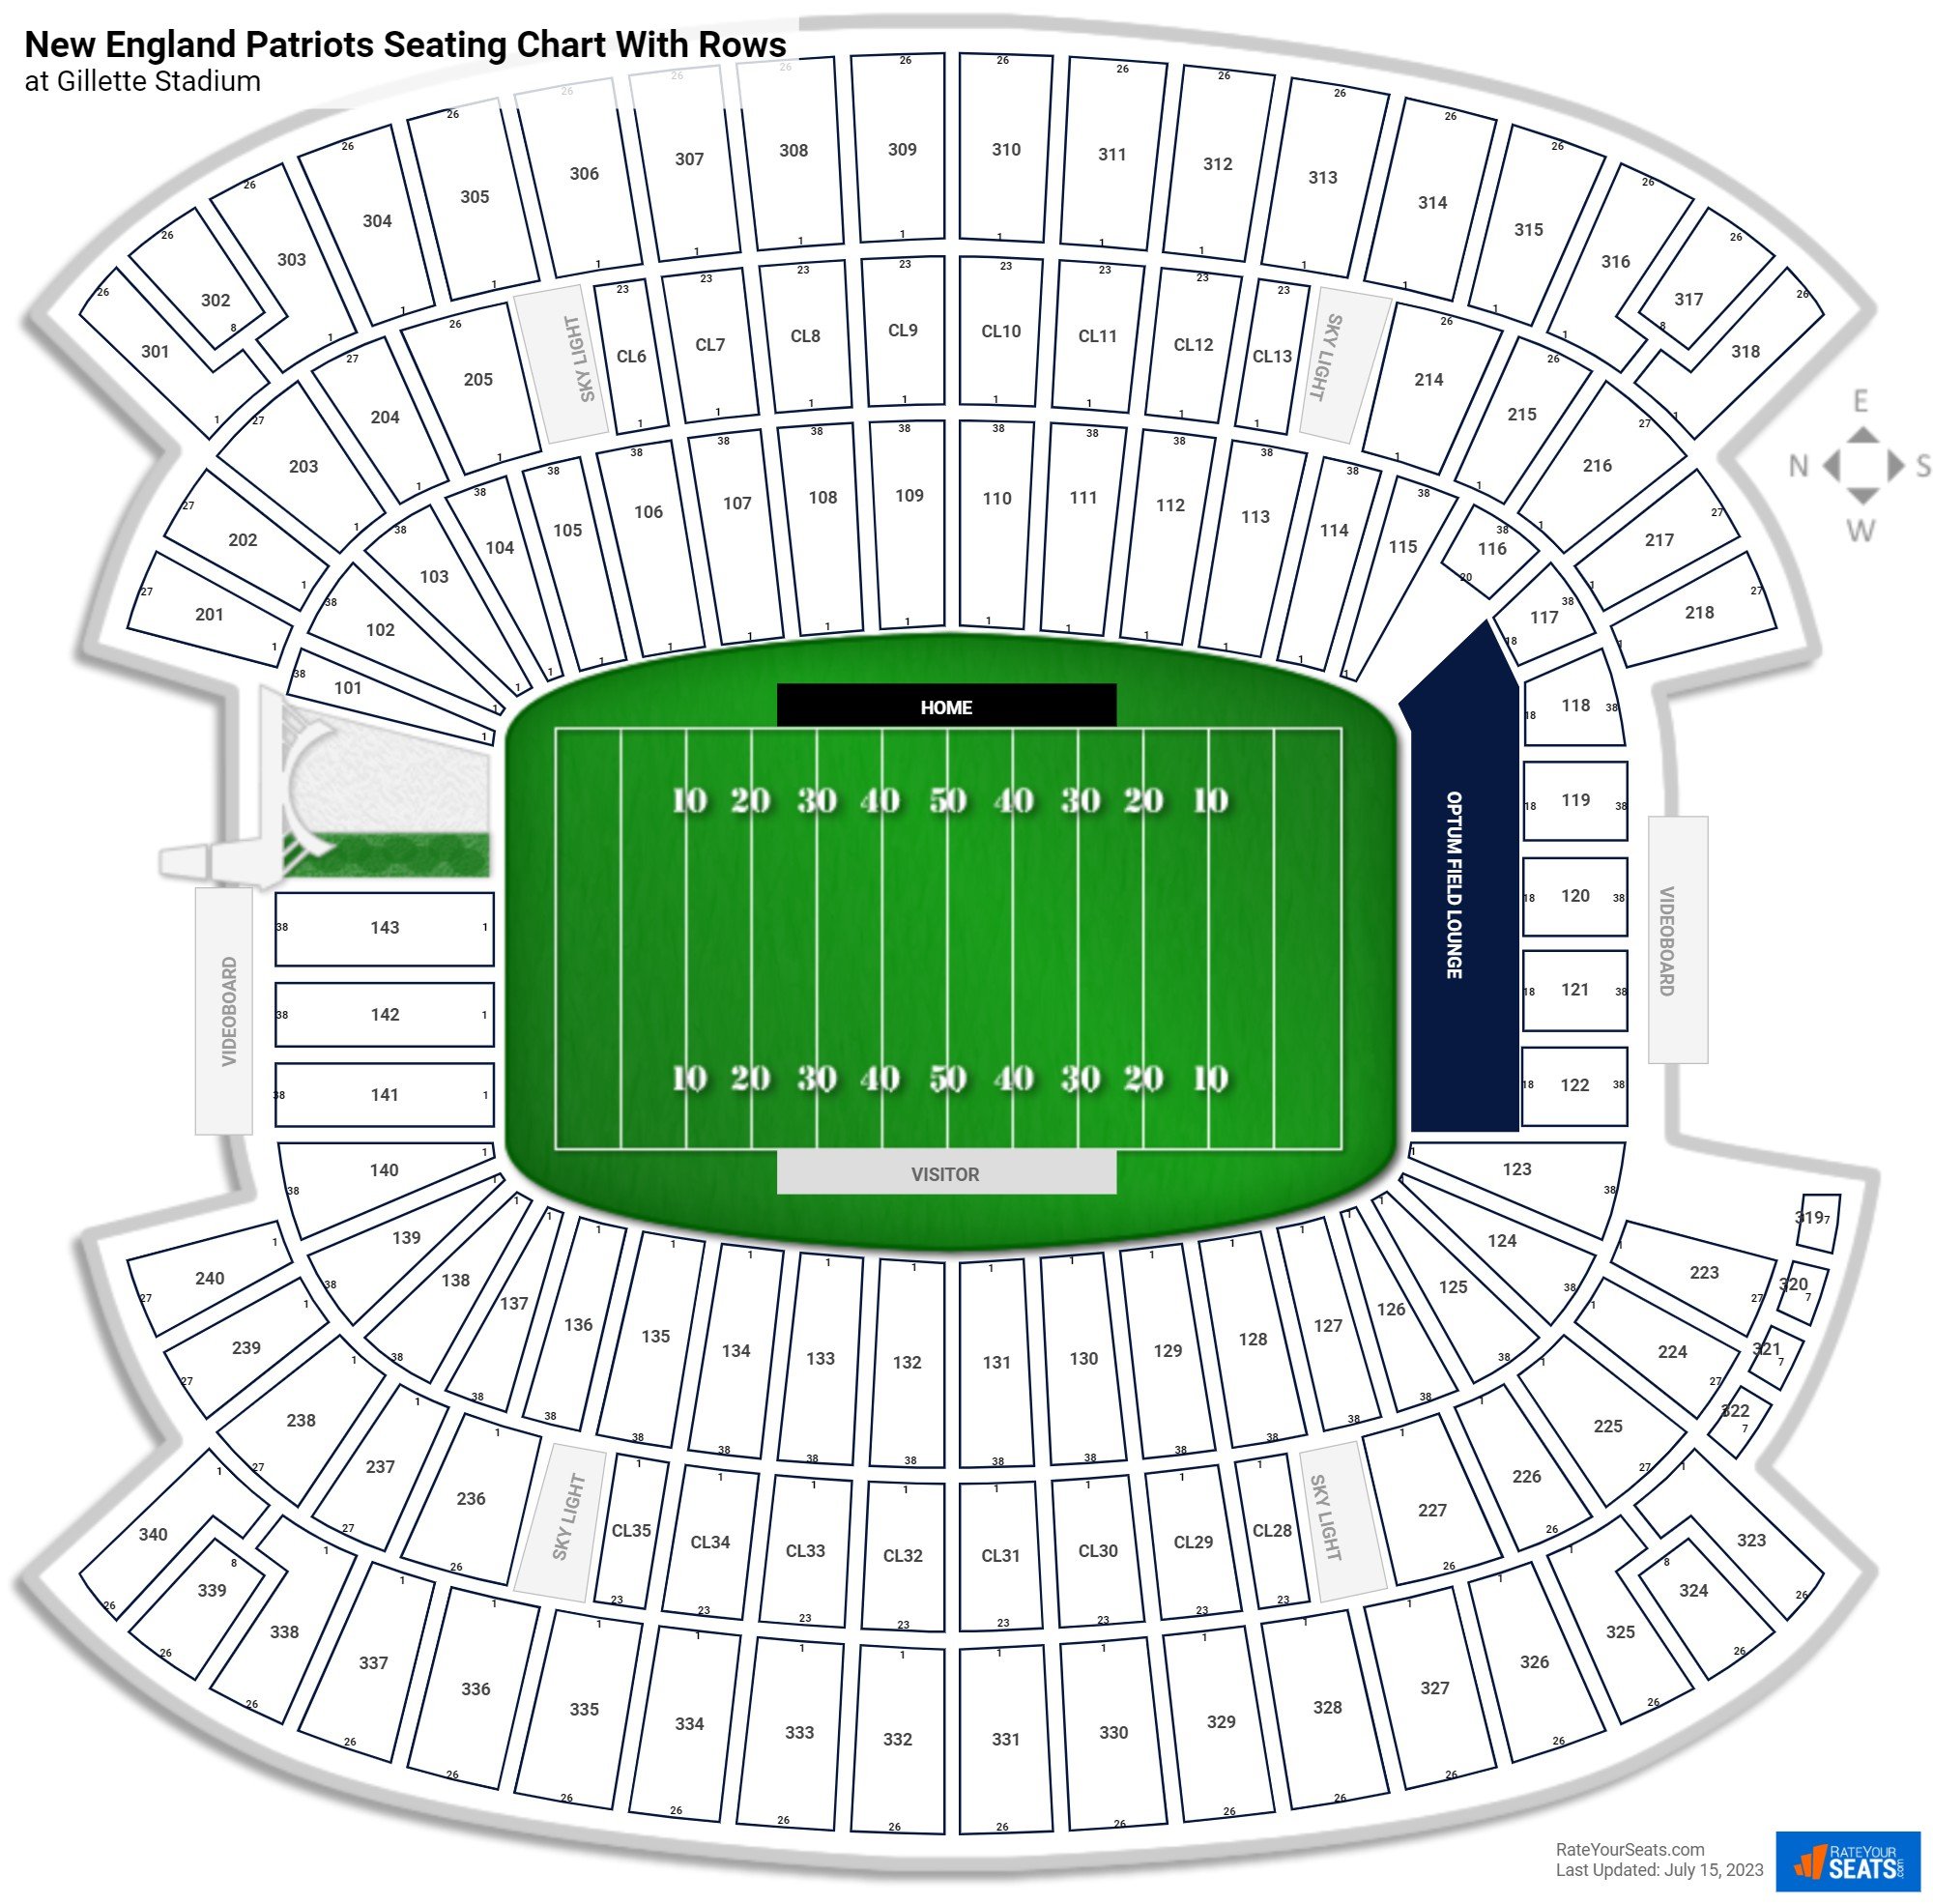 New England Patriots Seating Charts at Gillette Stadium